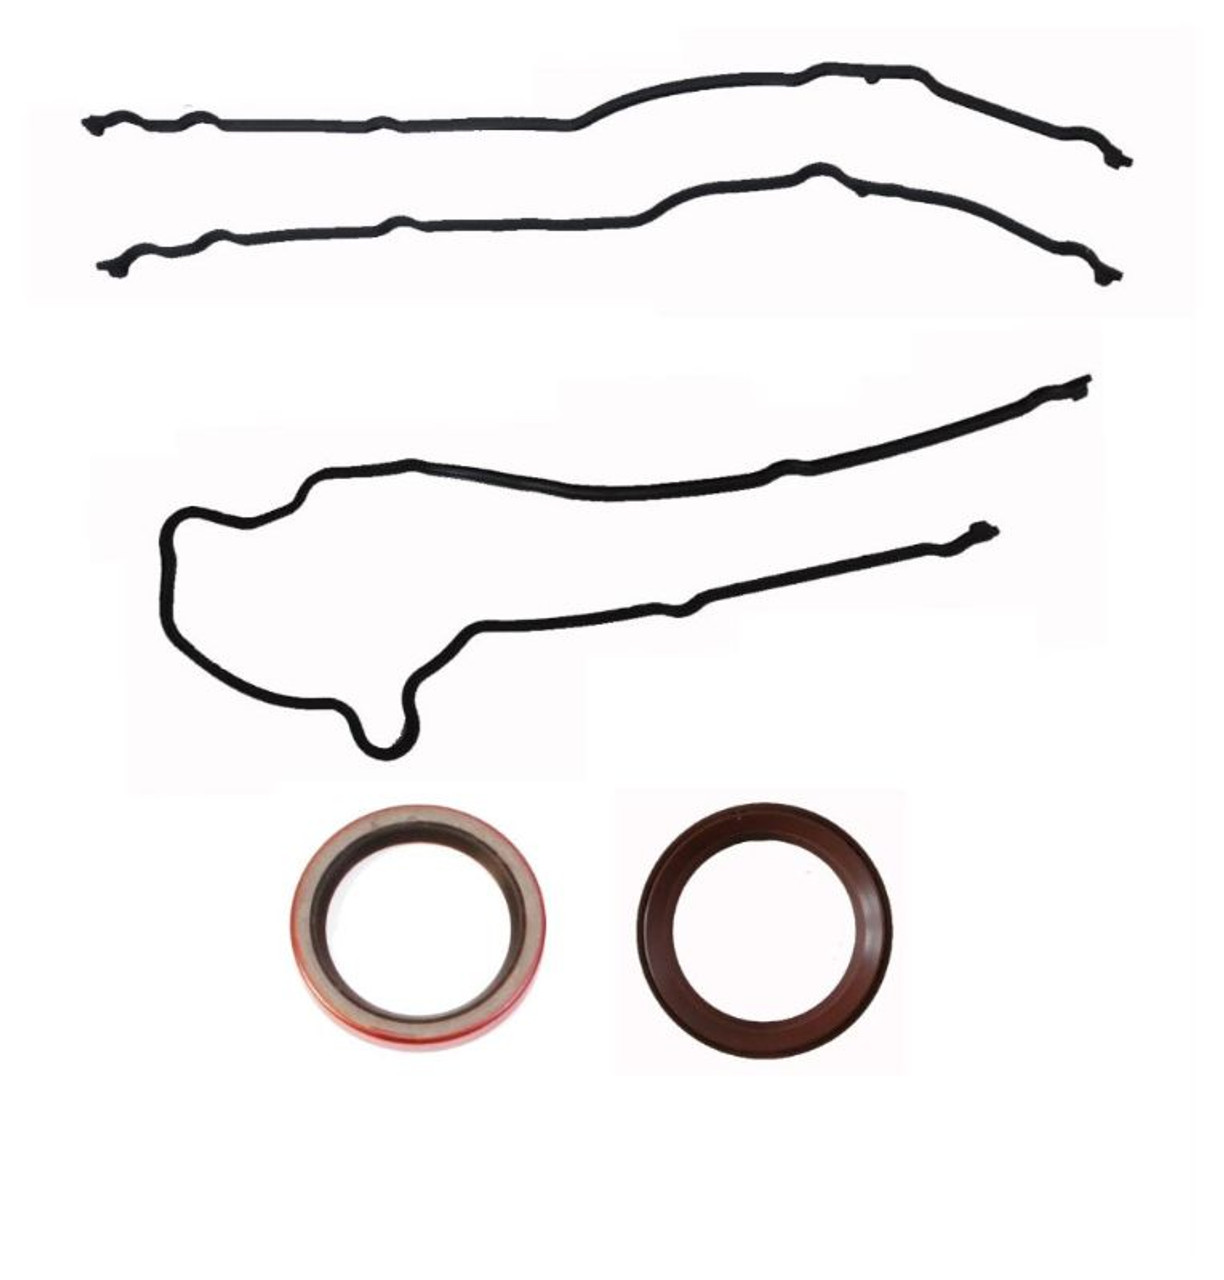 1999 Ford F-250 Super Duty 5.4L Engine Timing Cover Gasket Set TCF330-A -62